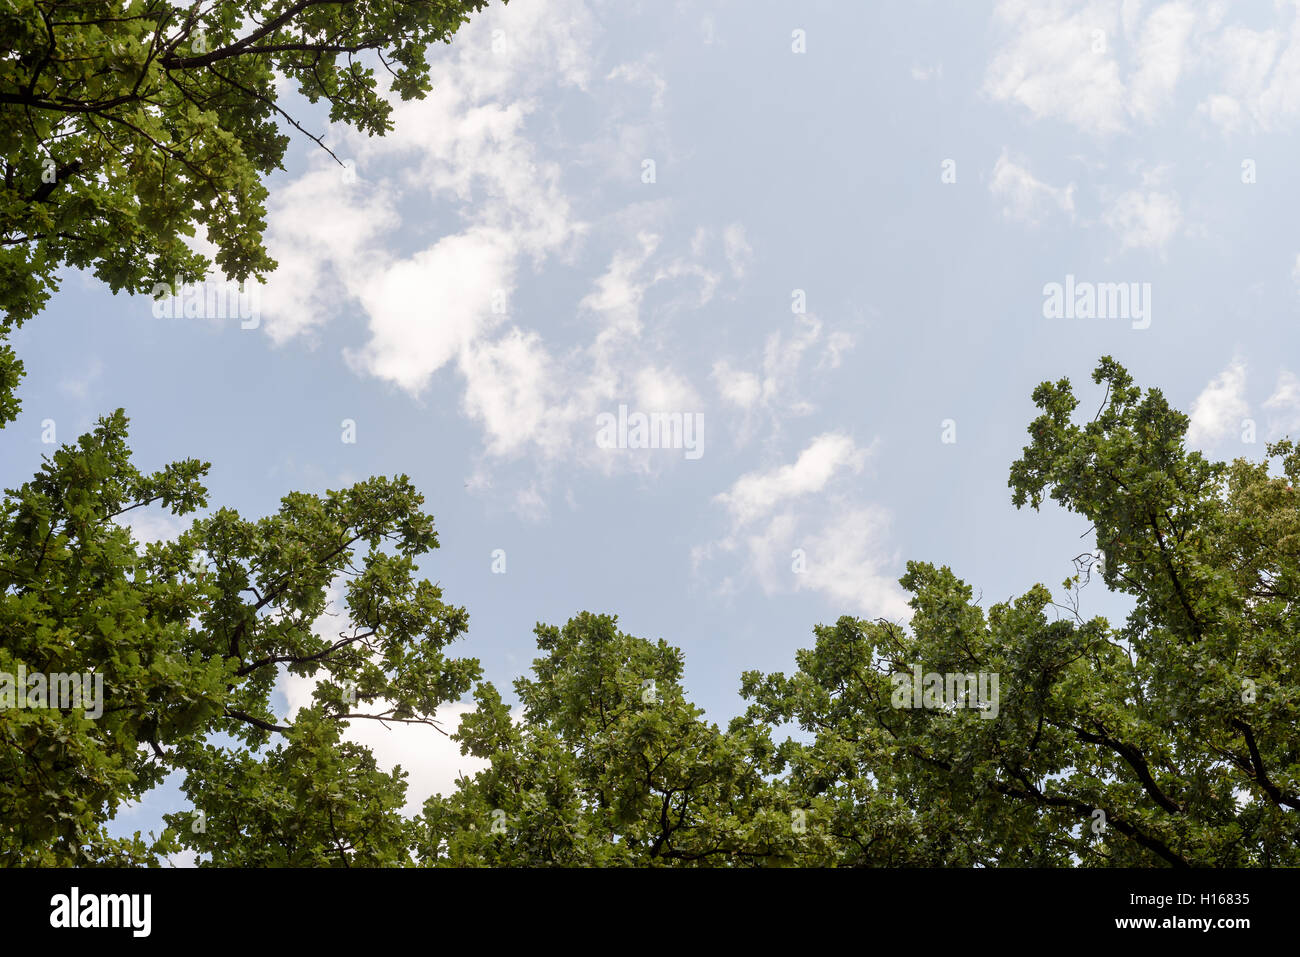 Large oak tree growing against a blue sky with copyspace area for forest based designs. Stock Photo